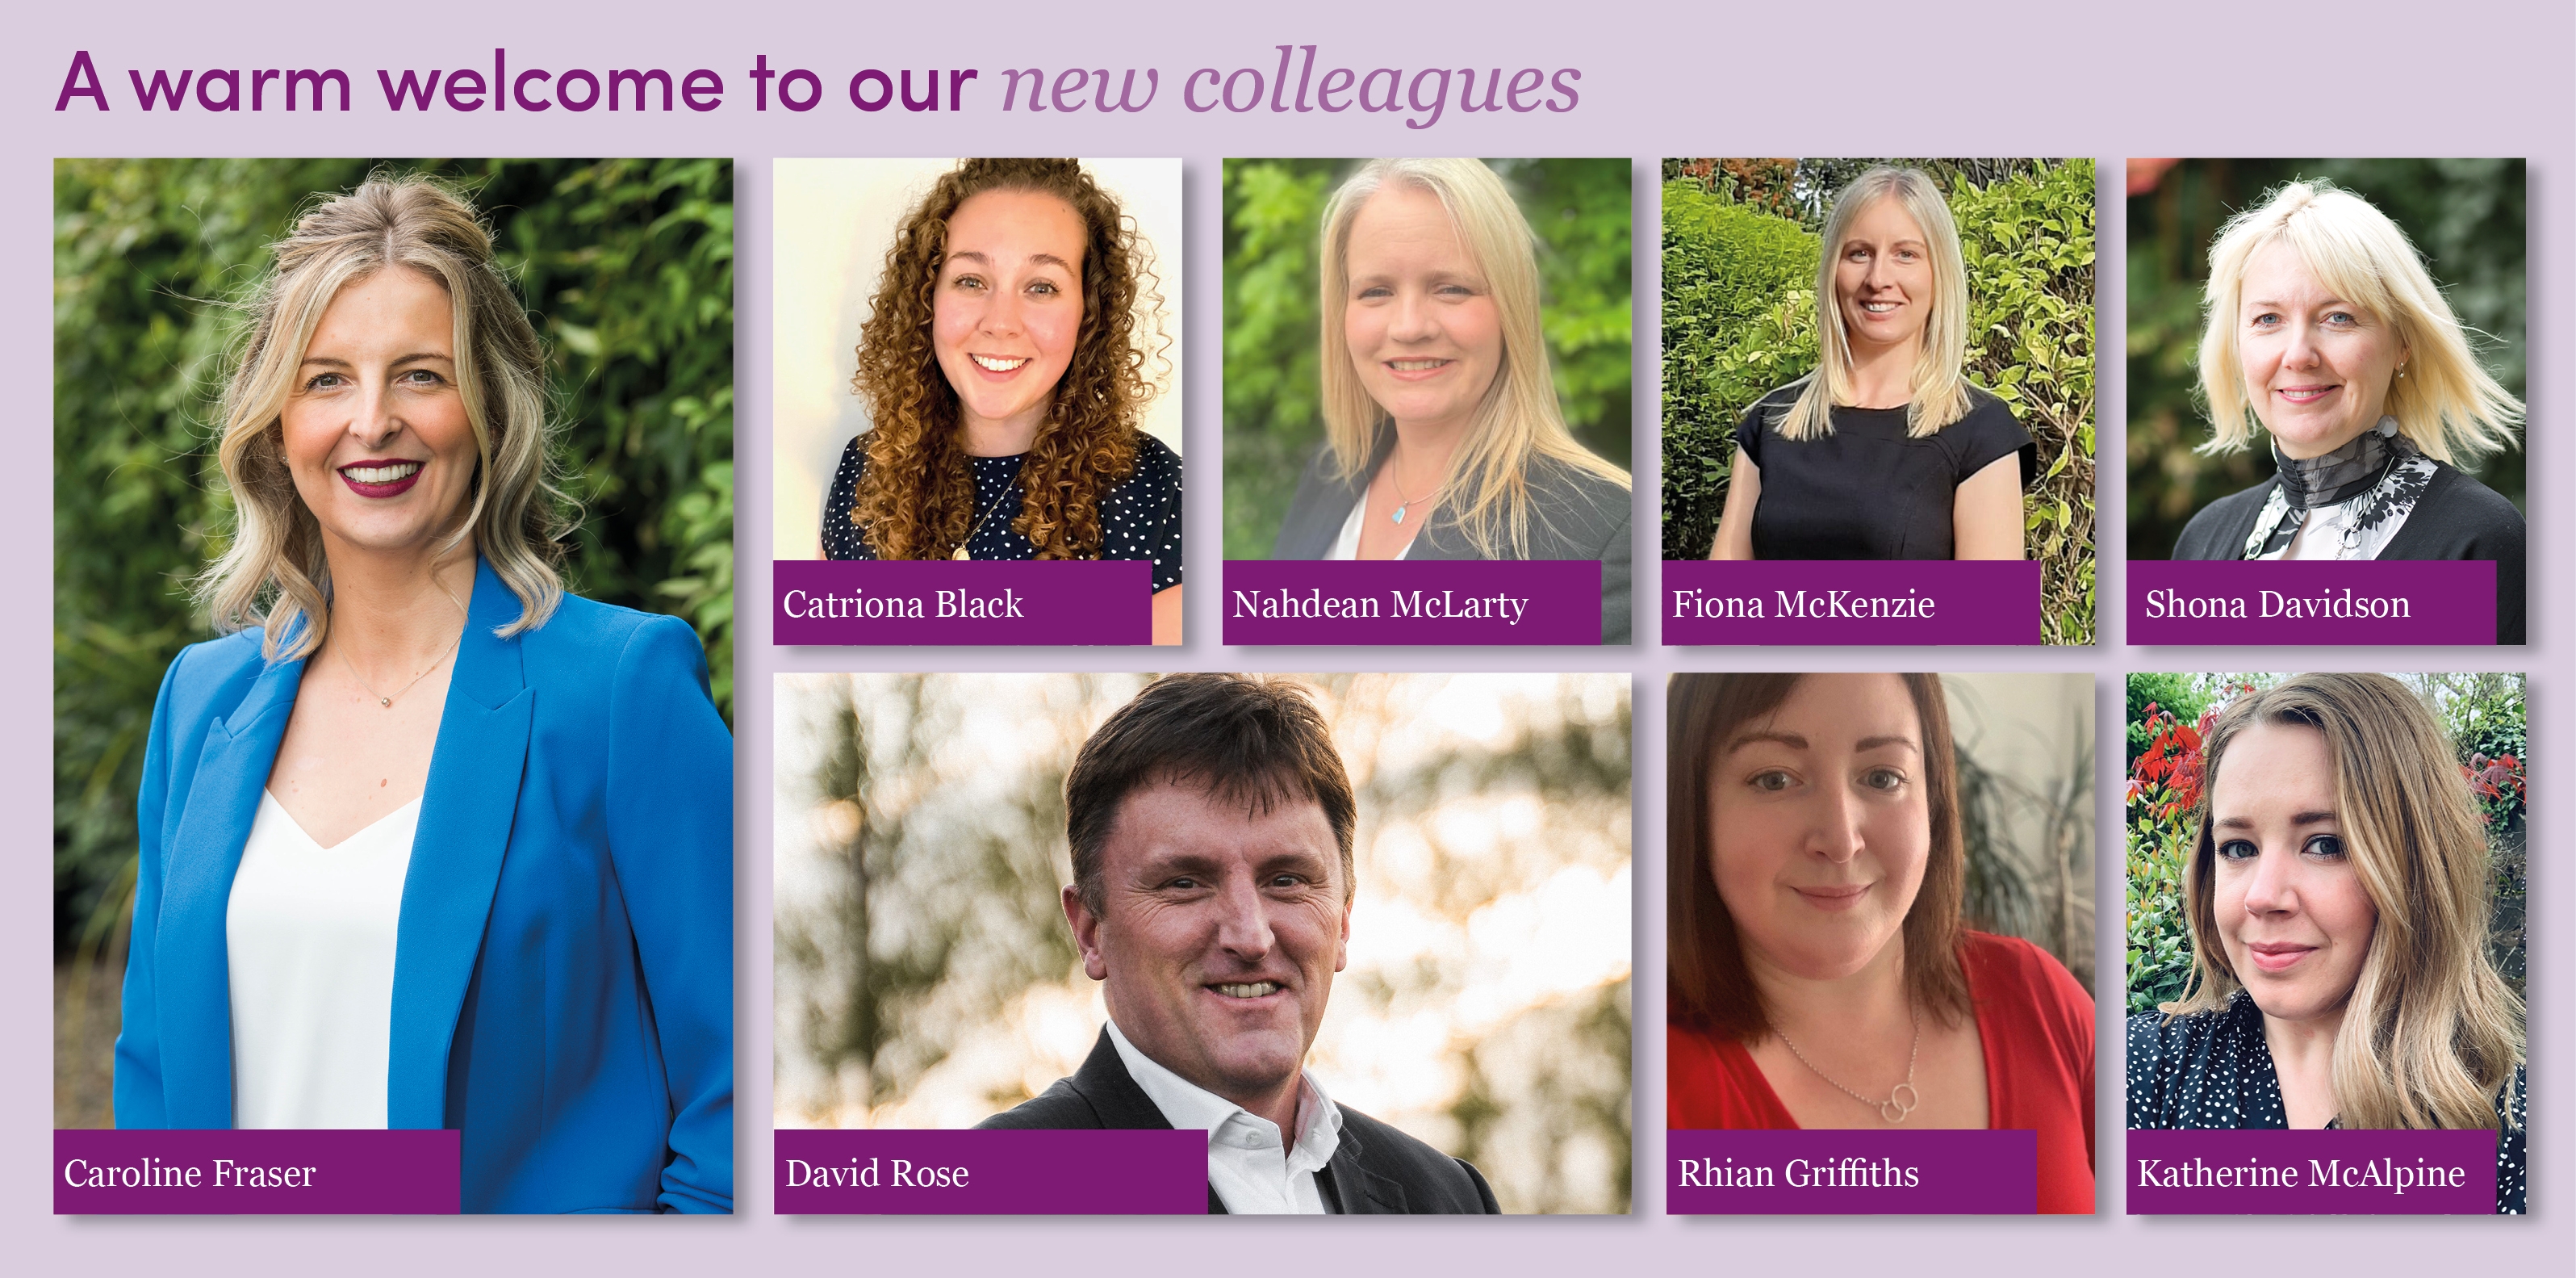 Top row L to R - Caroline Fraser, Catriona Black, Nahdean McLarty, Fiona McKenzie and Katherine McAlpine. Bottom row L to R - David Rose and Rhian Griffiths.